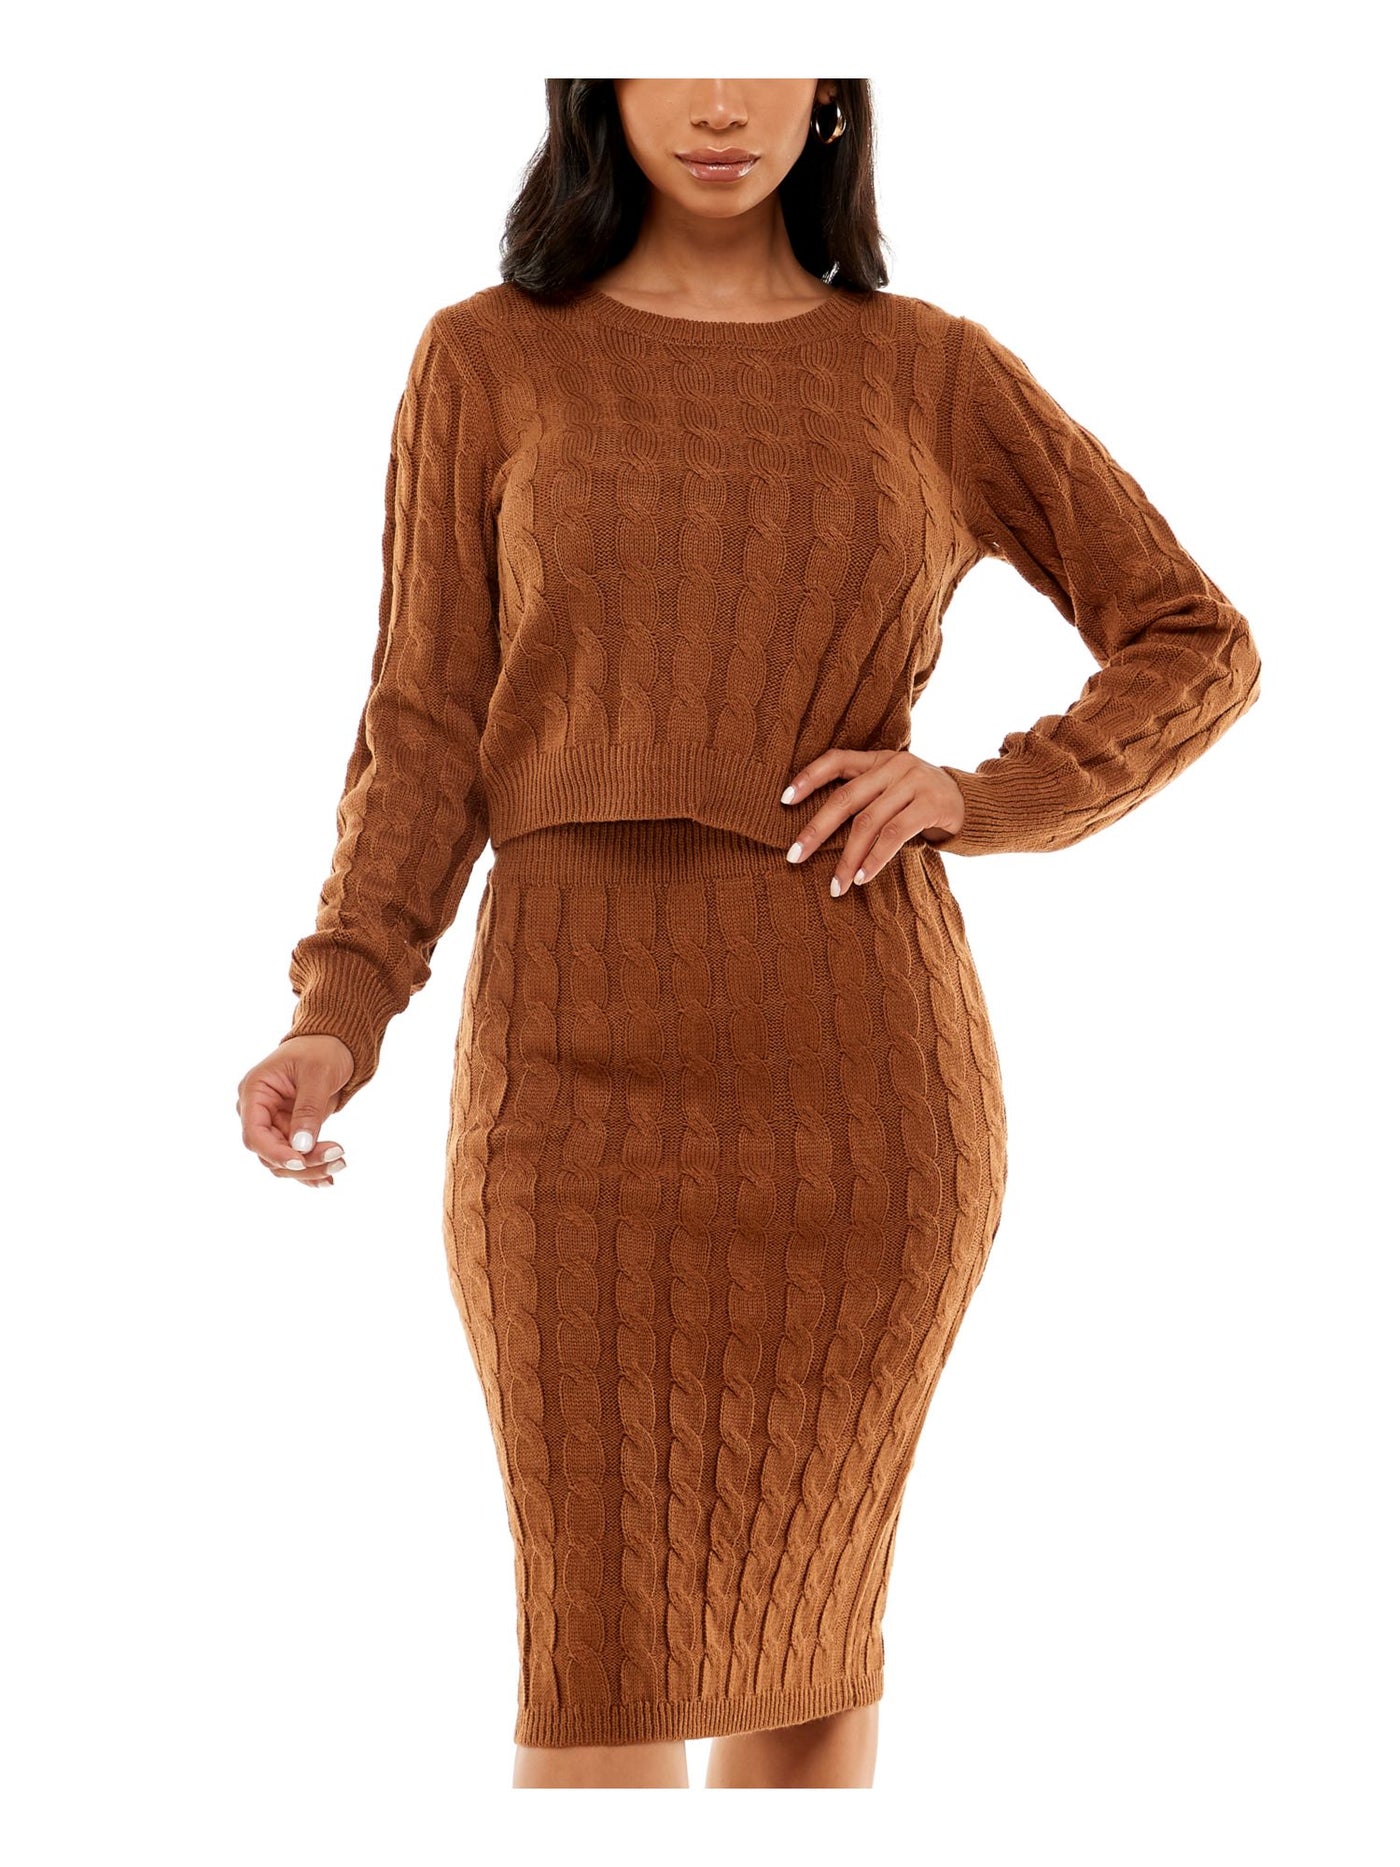 ALMOST FAMOUS Womens Brown Long Sleeve Jewel Neck Knee Length Party Body Con Dress Juniors S